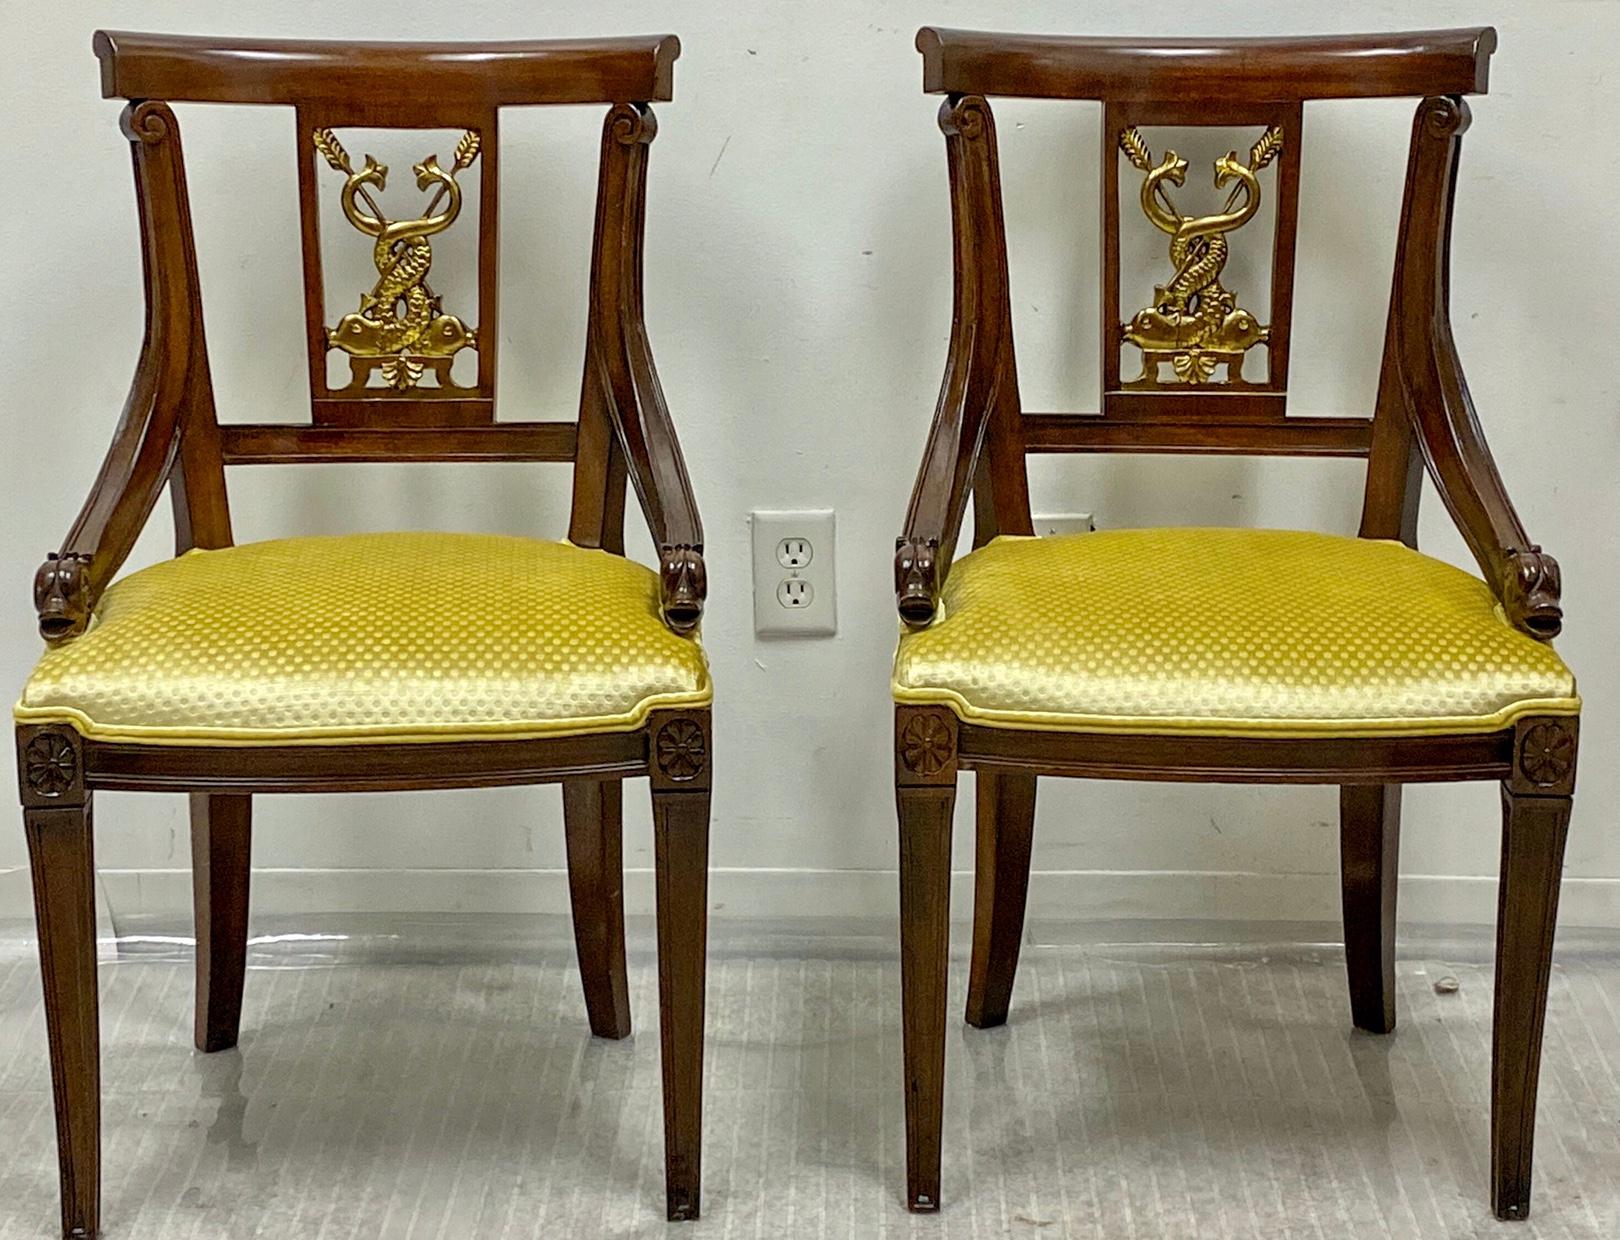 20th Century Midcentury Neoclassical Style Mahogany and Gilt Chairs, a Pair